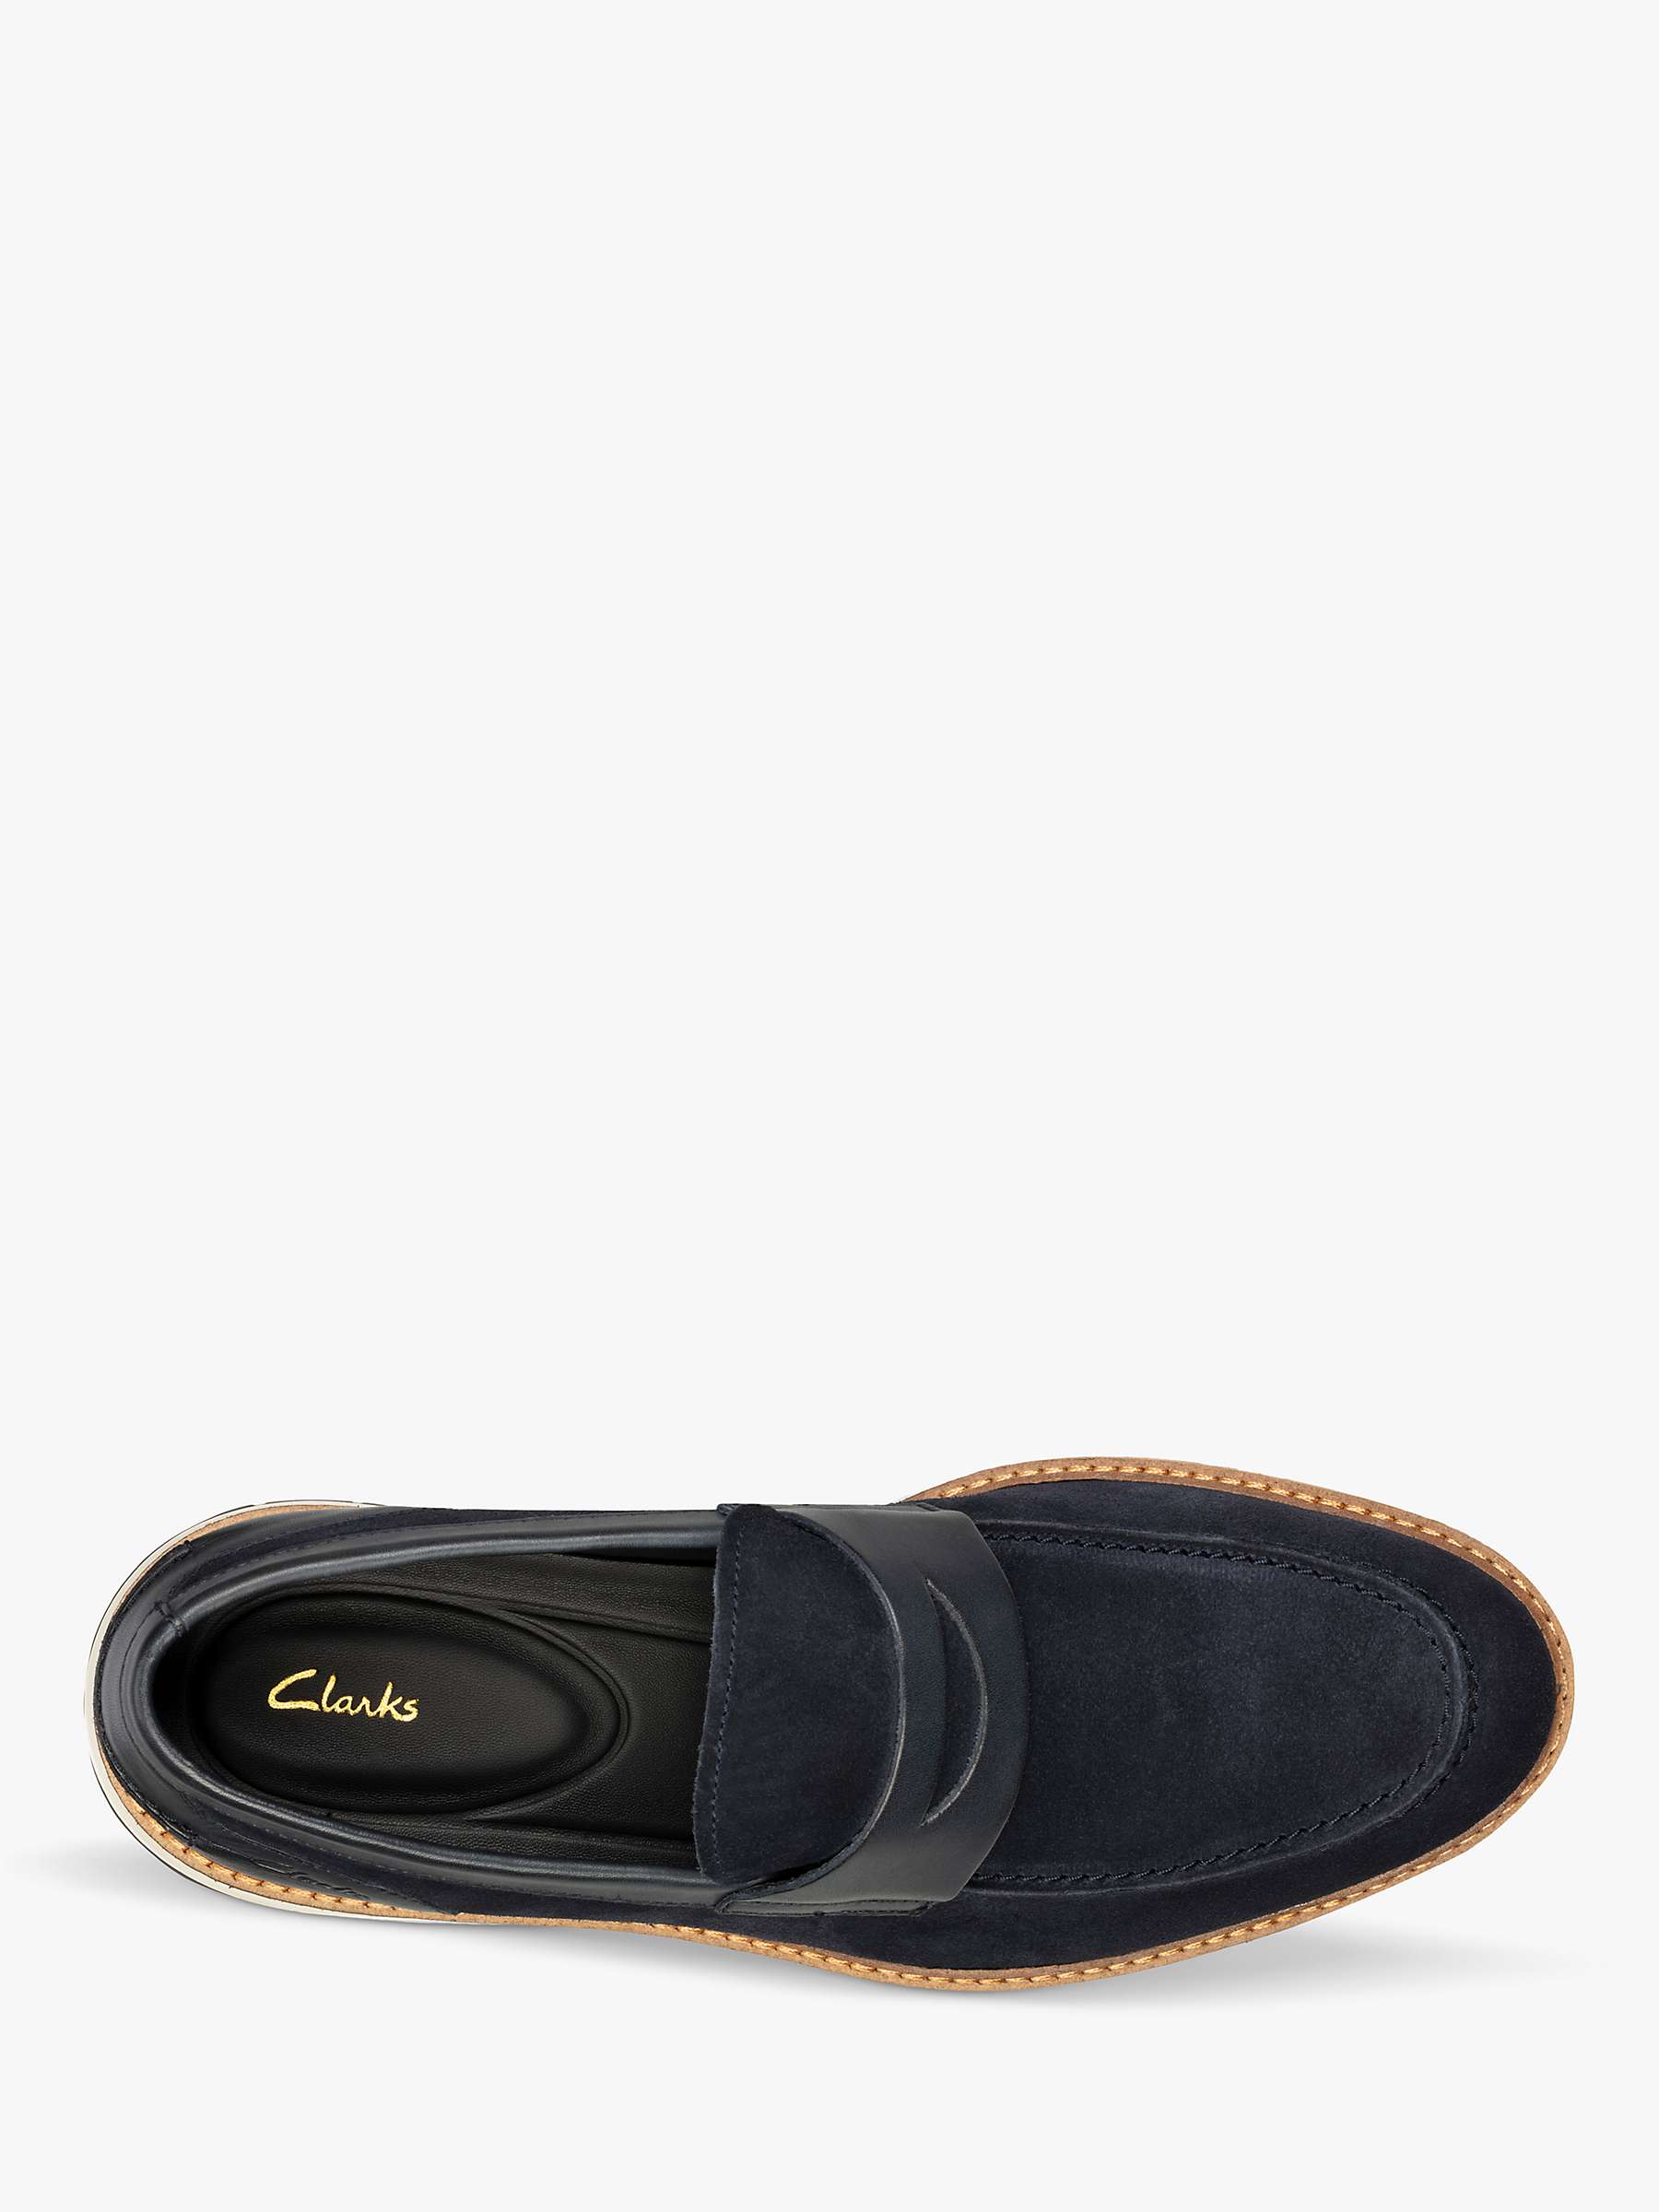 Buy Clarks Chantry Suede Penny Loafers, Navy Online at johnlewis.com